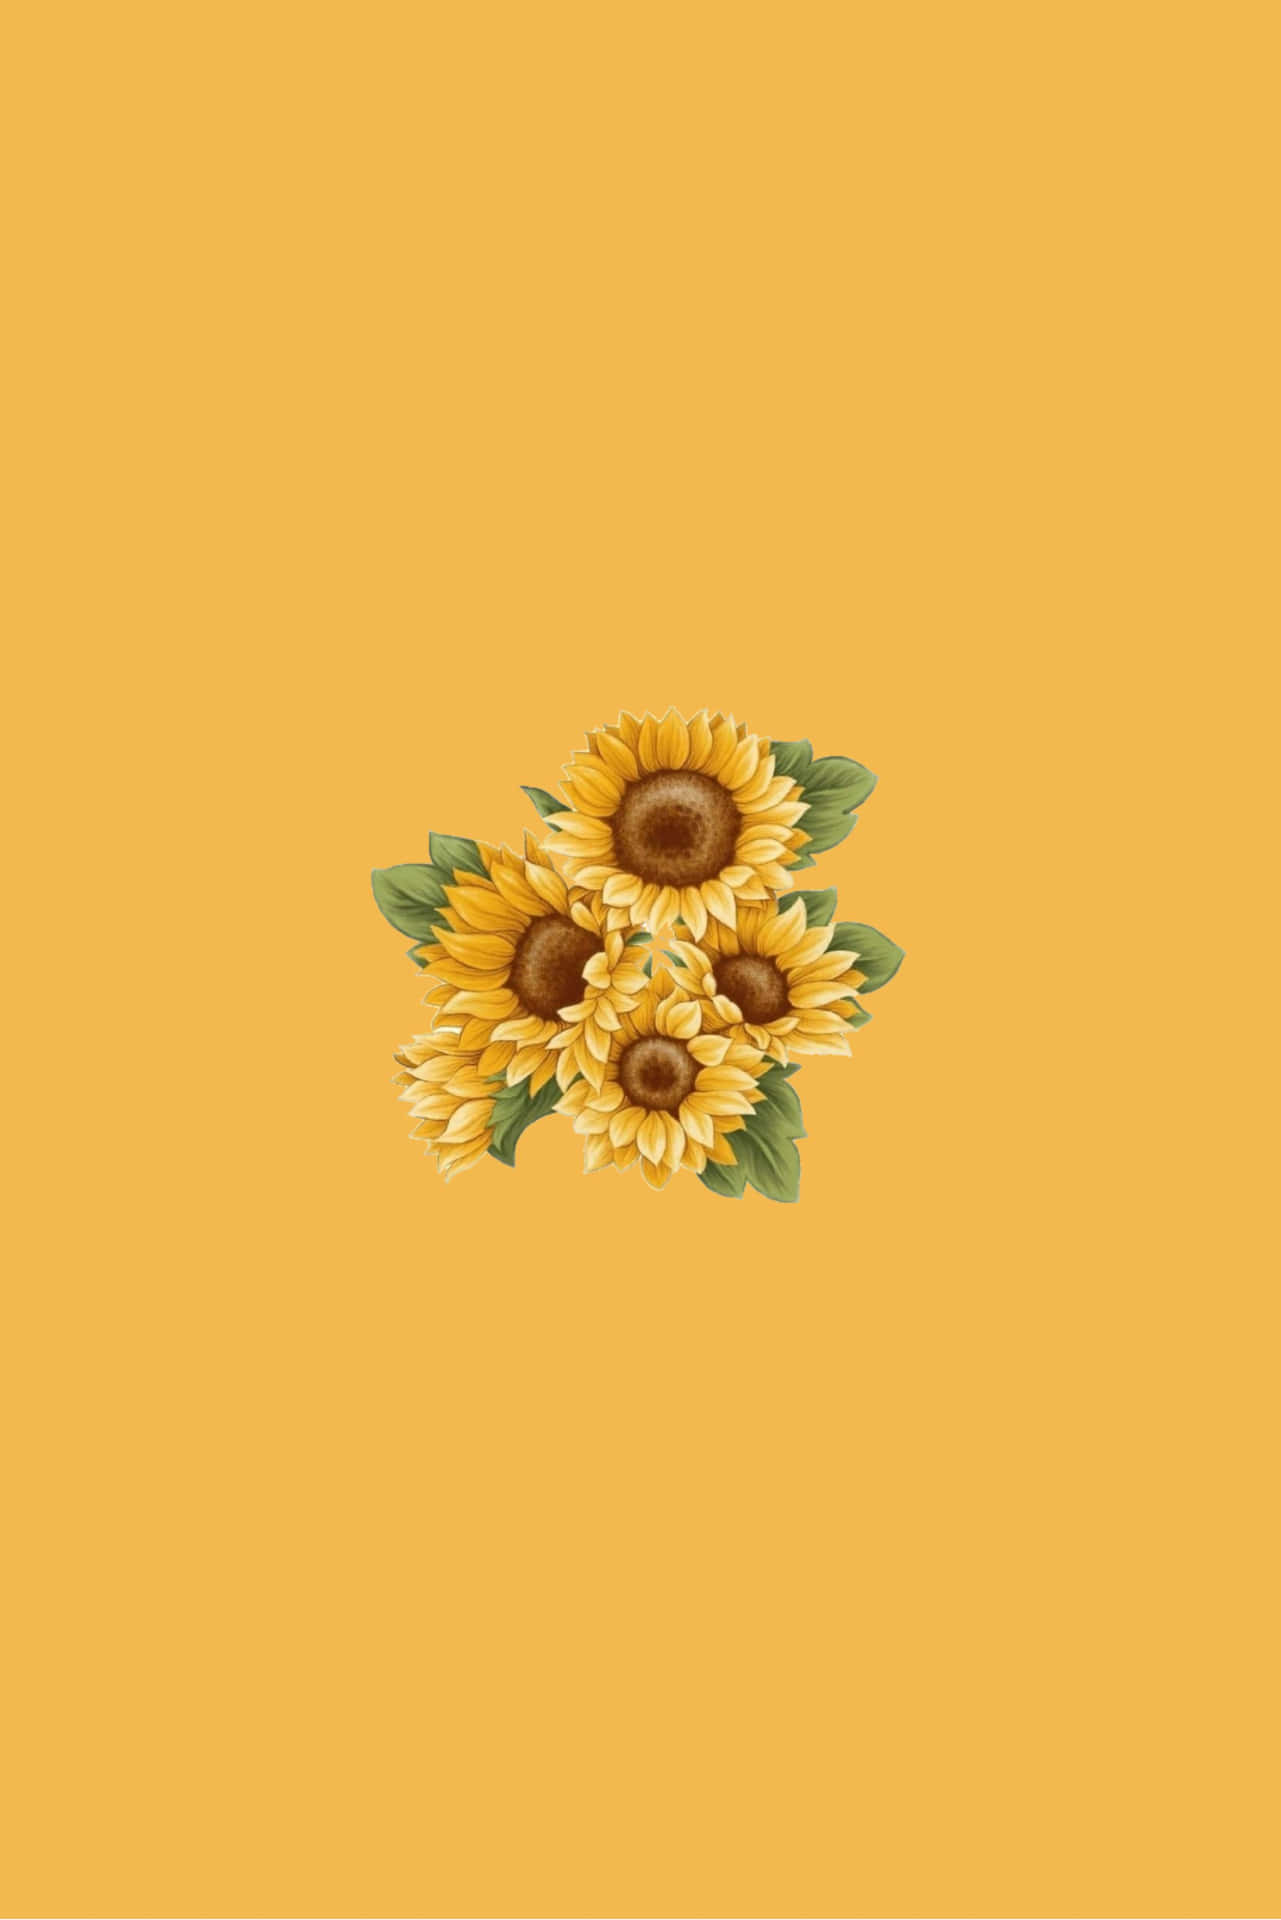 A sunflower surrounded by its bright yellow petals Wallpaper